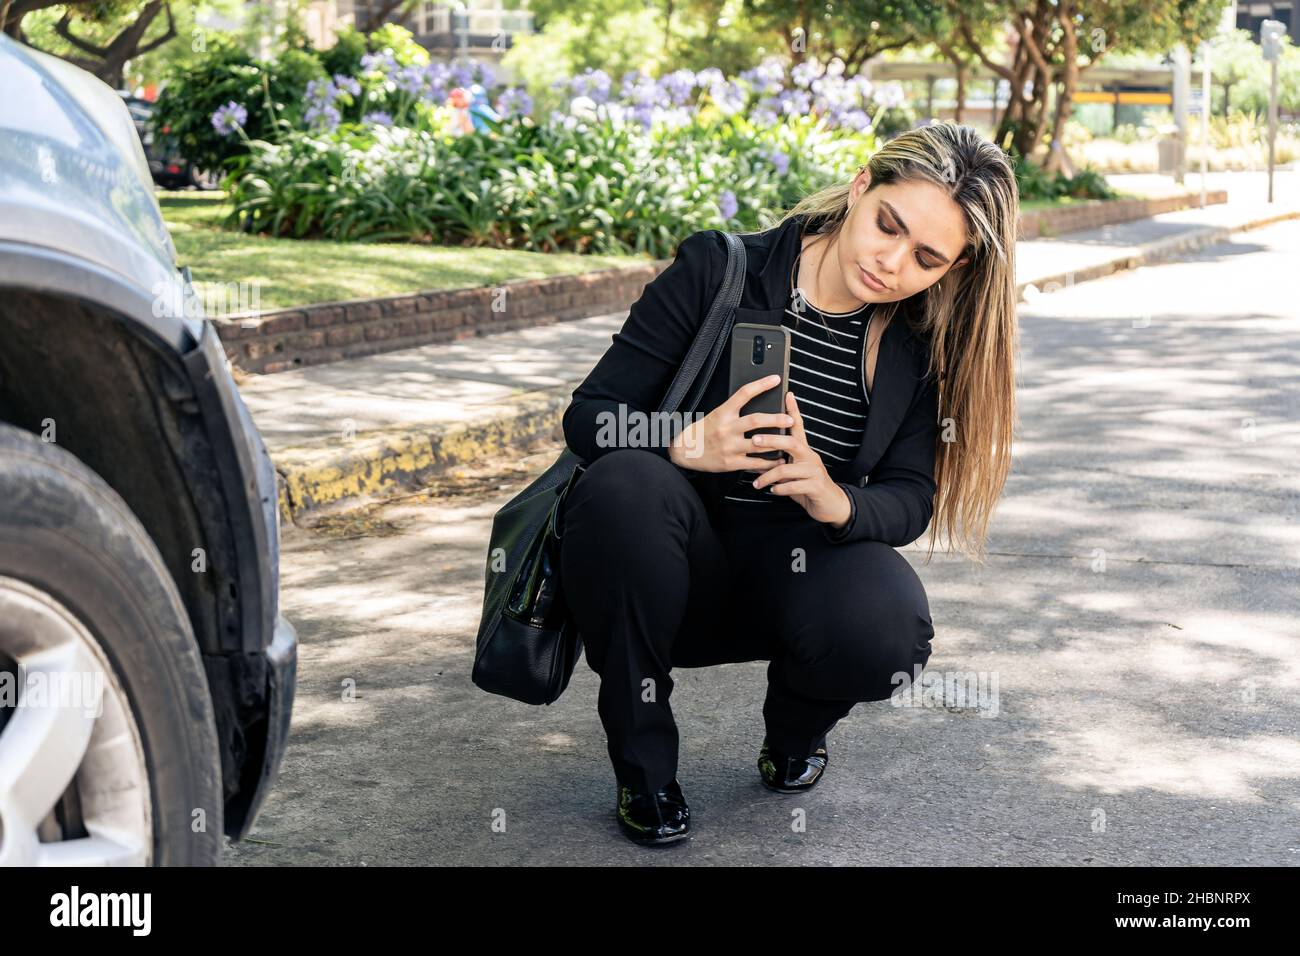 A Business woman takes pictures of crash damage to her car to send to insurance company. Stock Photo